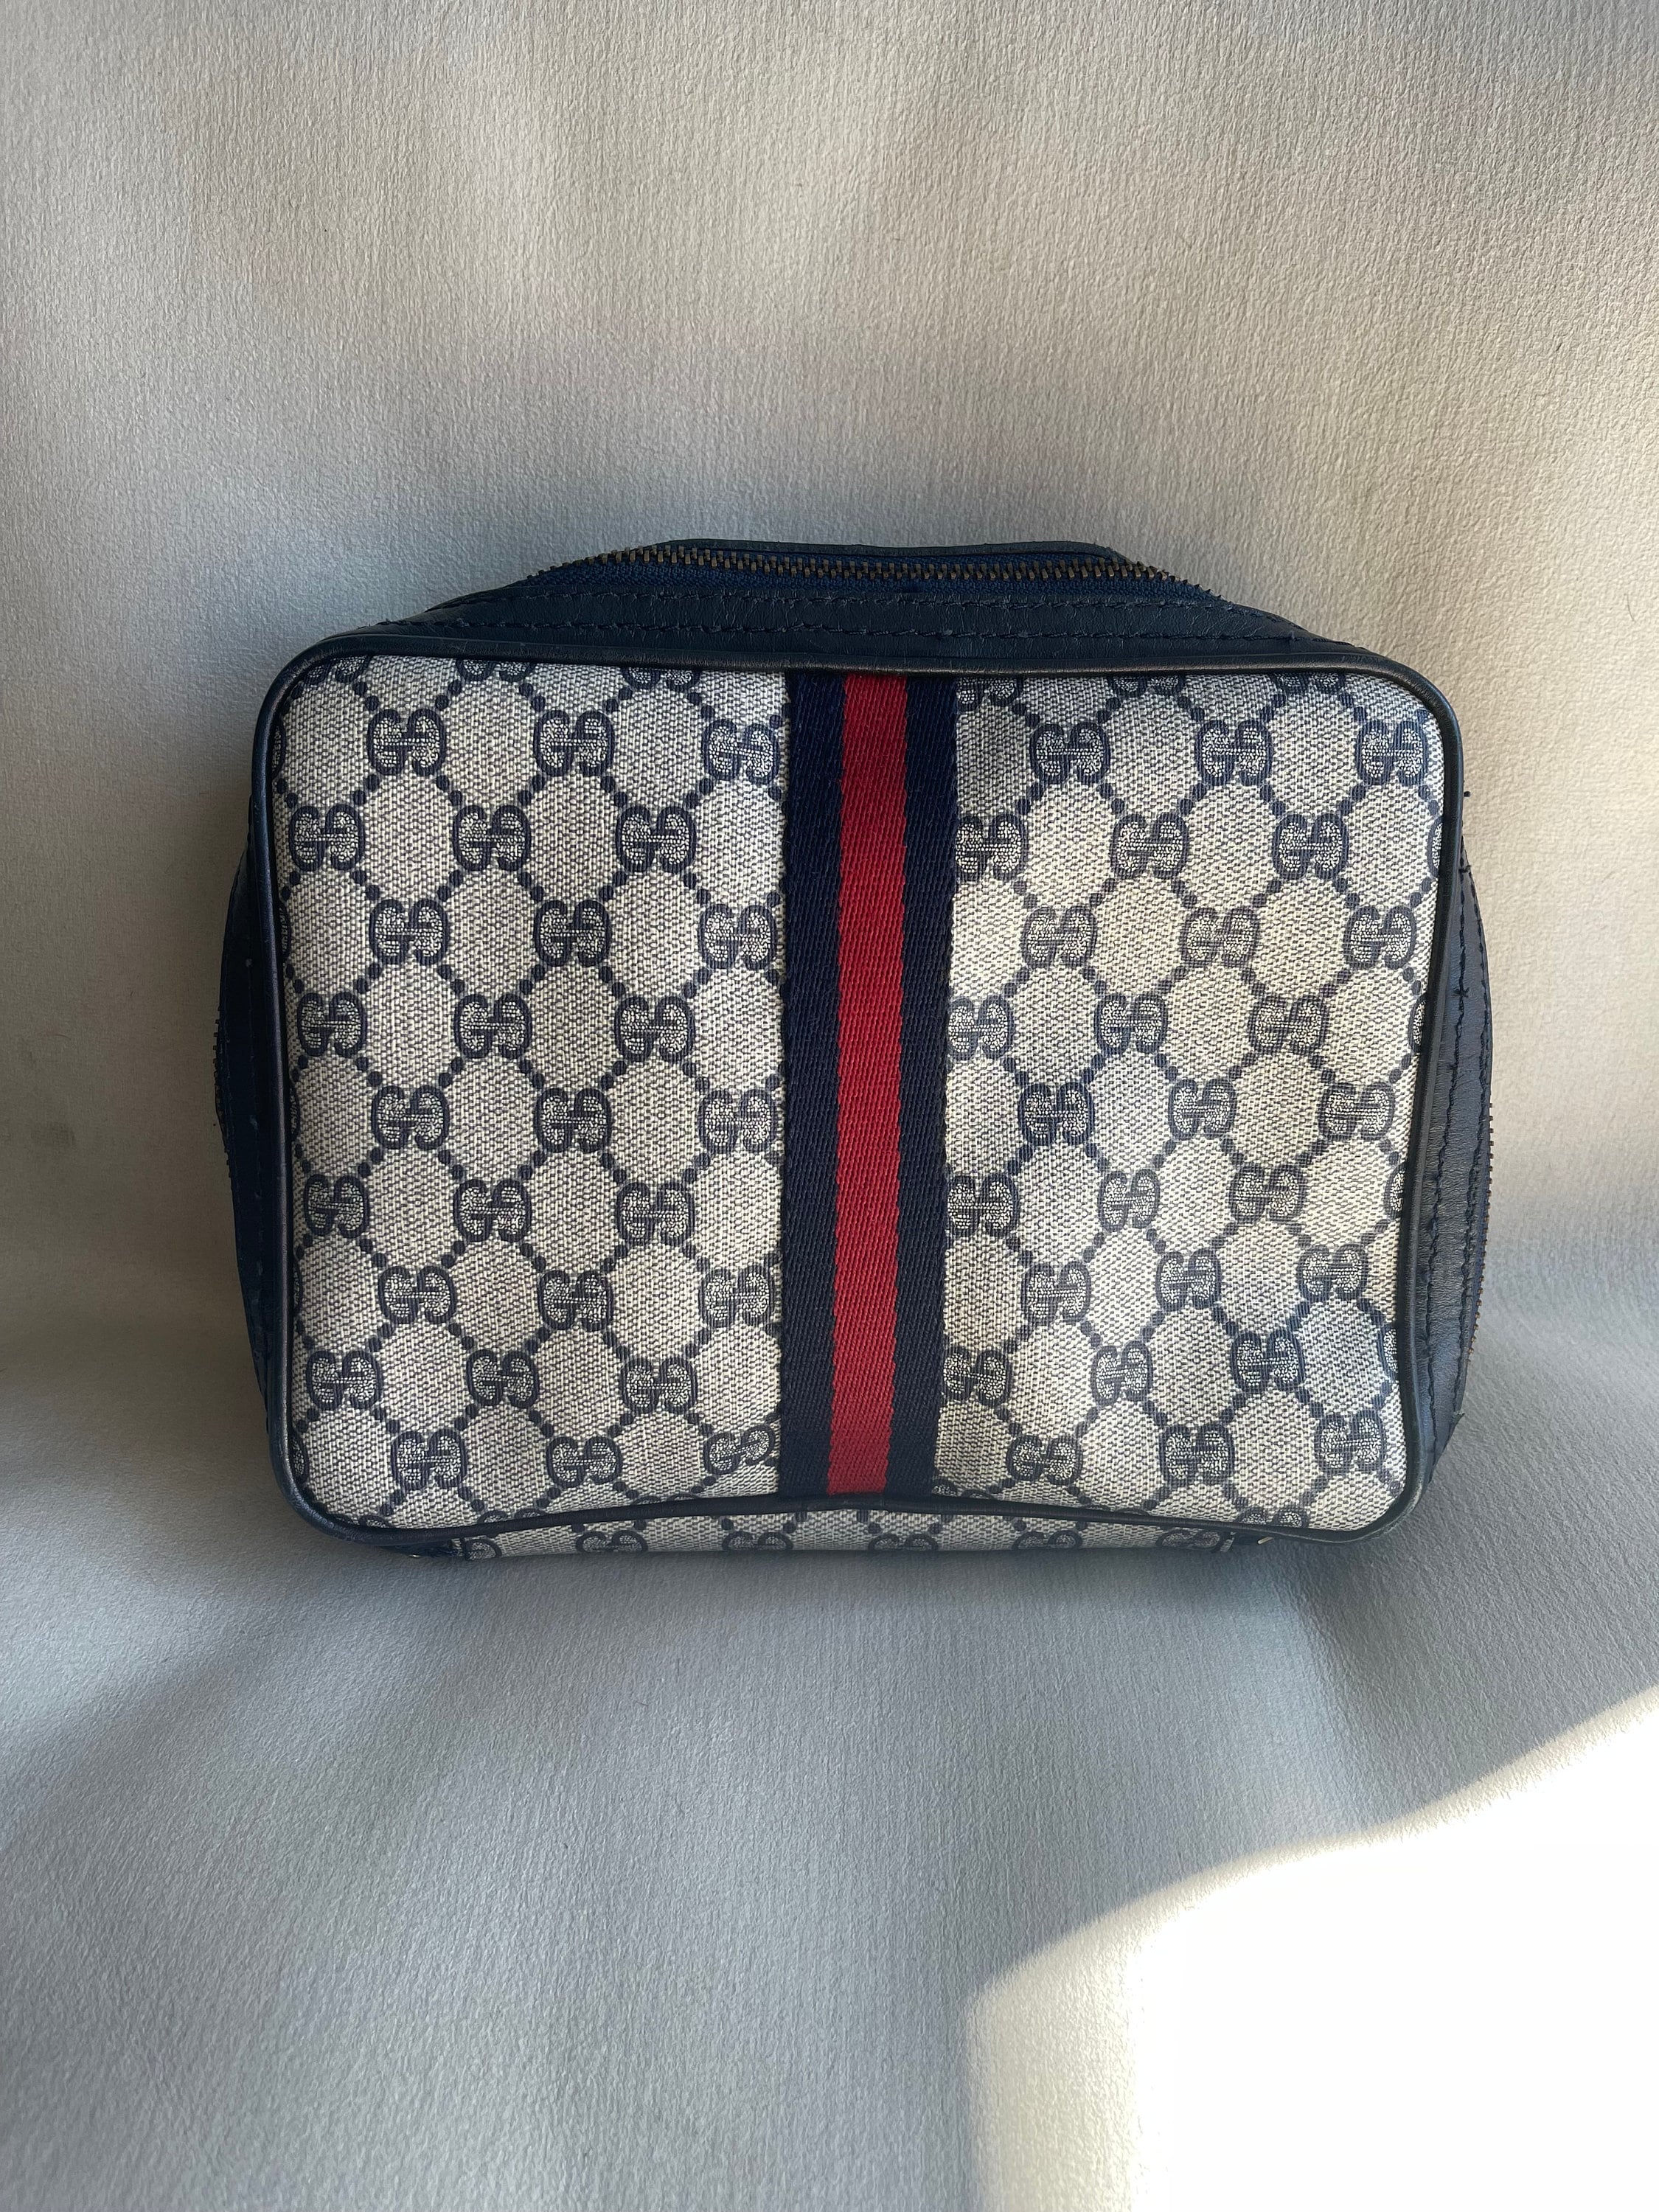 Gucci Vintage Brown GG Monogram Mini / Small Cosmetic Makeup Brush Pouch